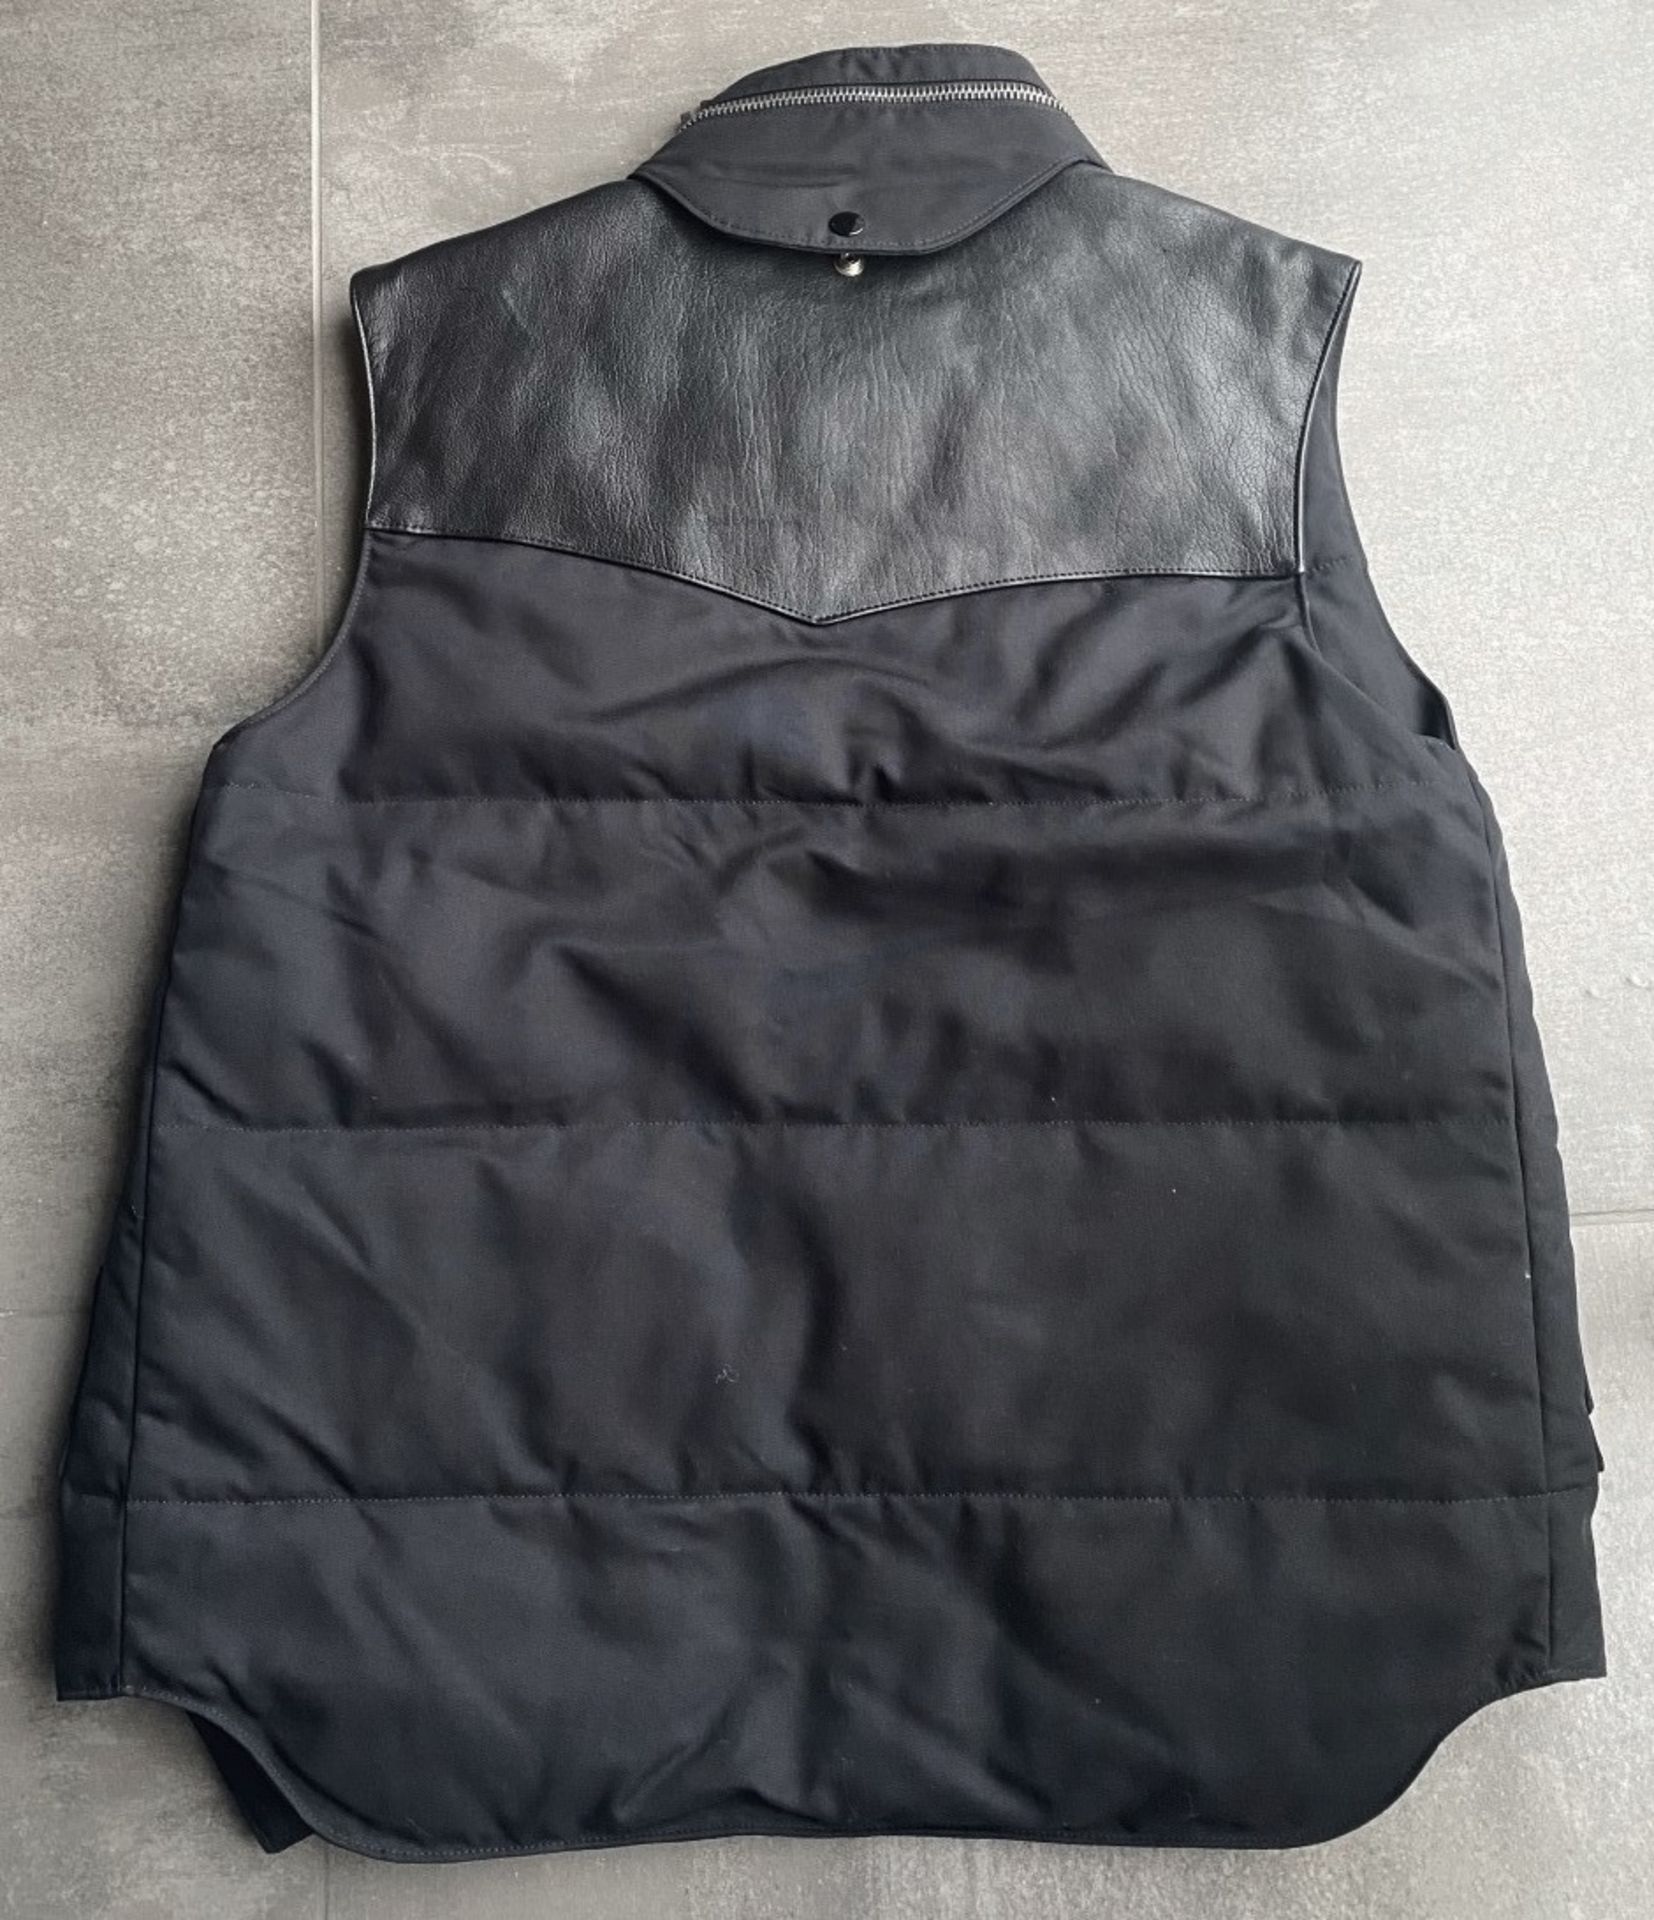 1 x Men's Genuine Yves Saint Laurant Gillet / Body Warmer In Black With Leather Panelling - Image 5 of 8